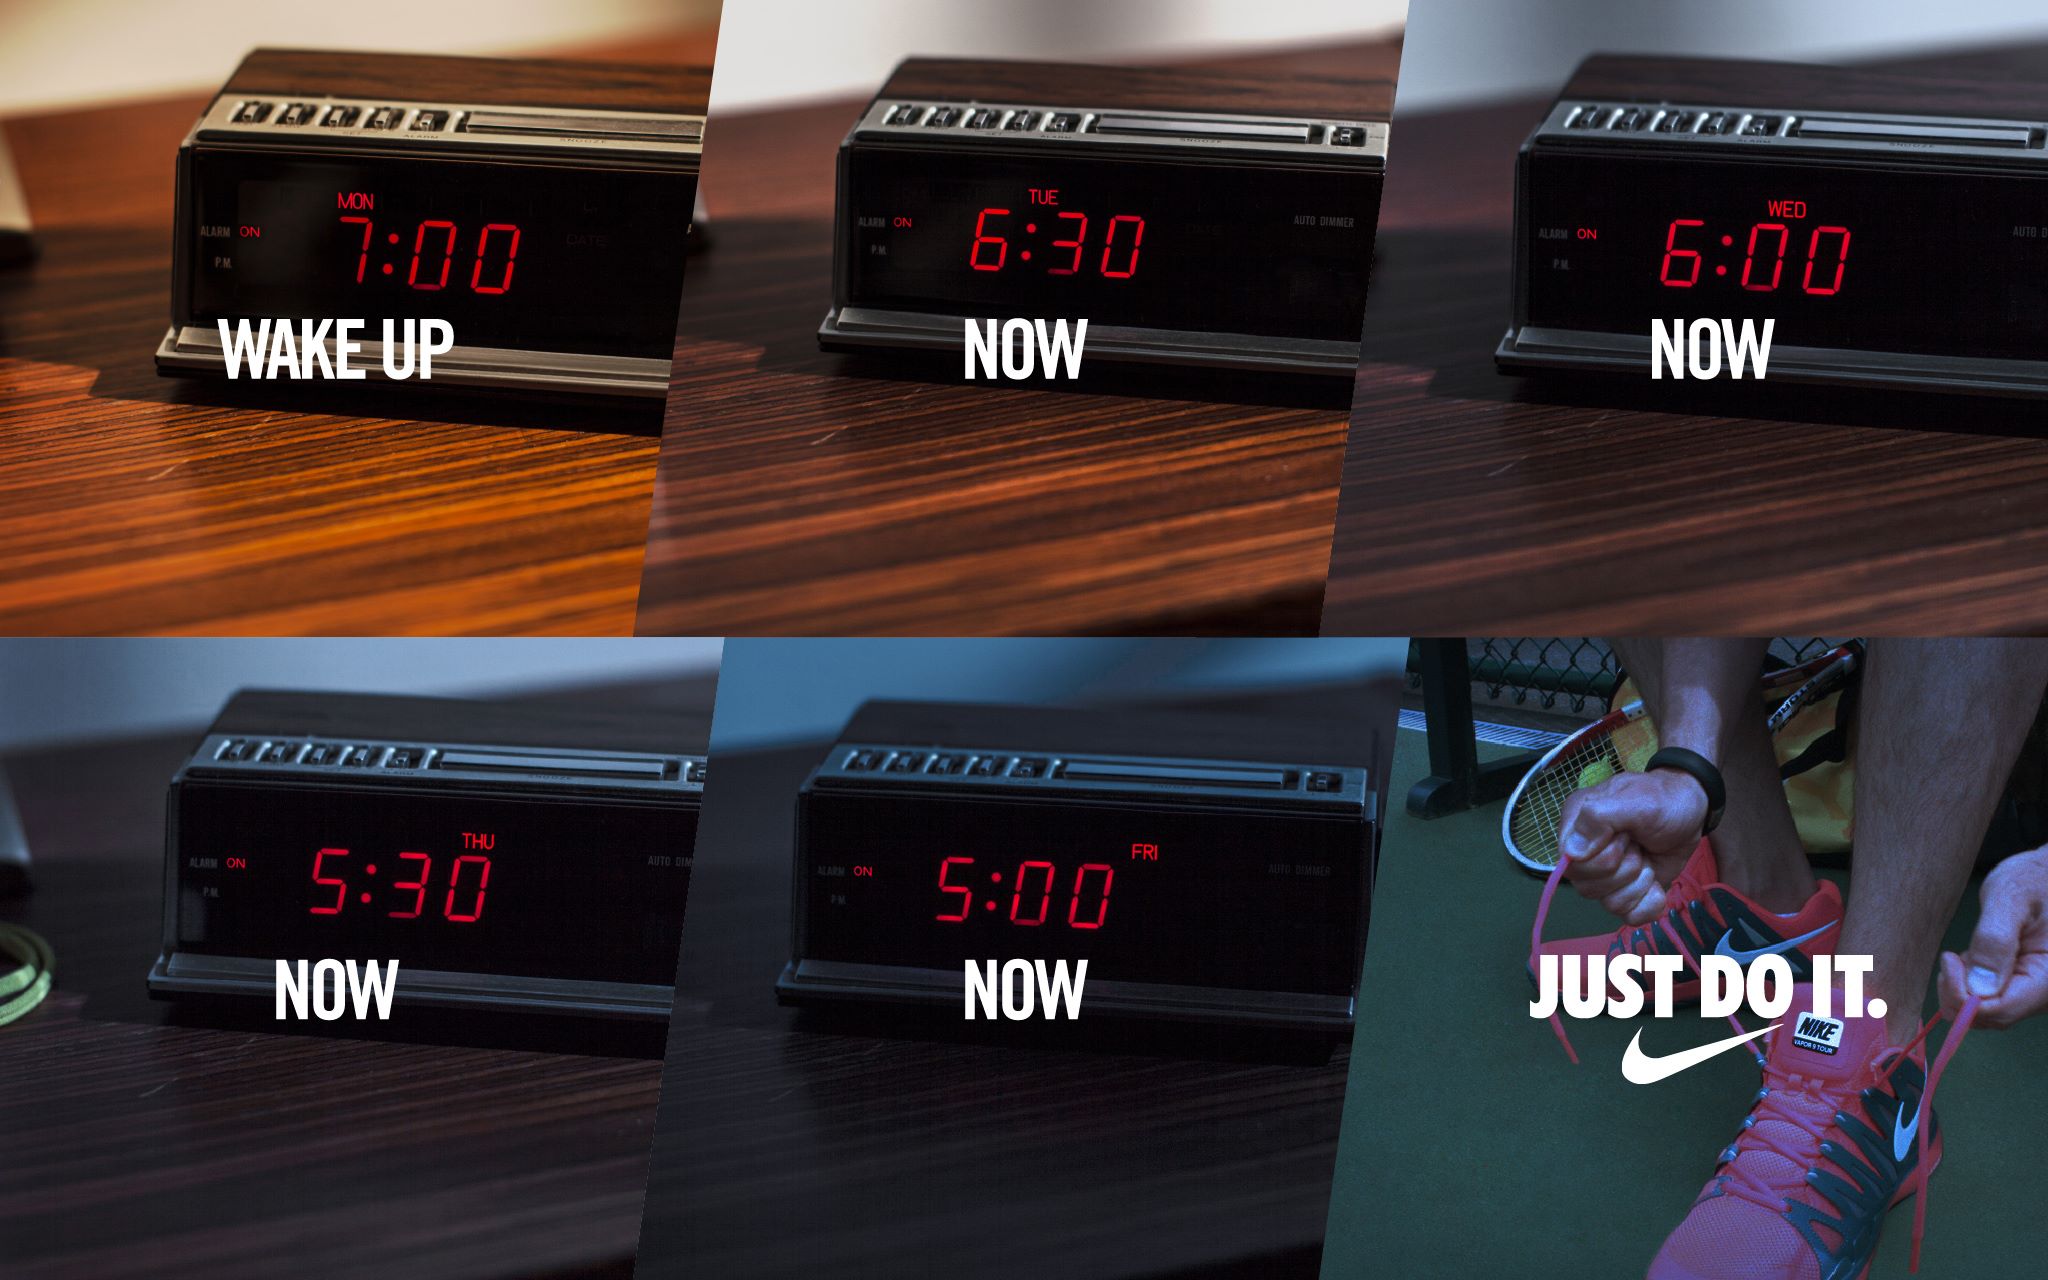 If you can get up at 7, get up at 6:30. Get up at 6. 5:30. 5. Practice while they sleep. #JustDoIt